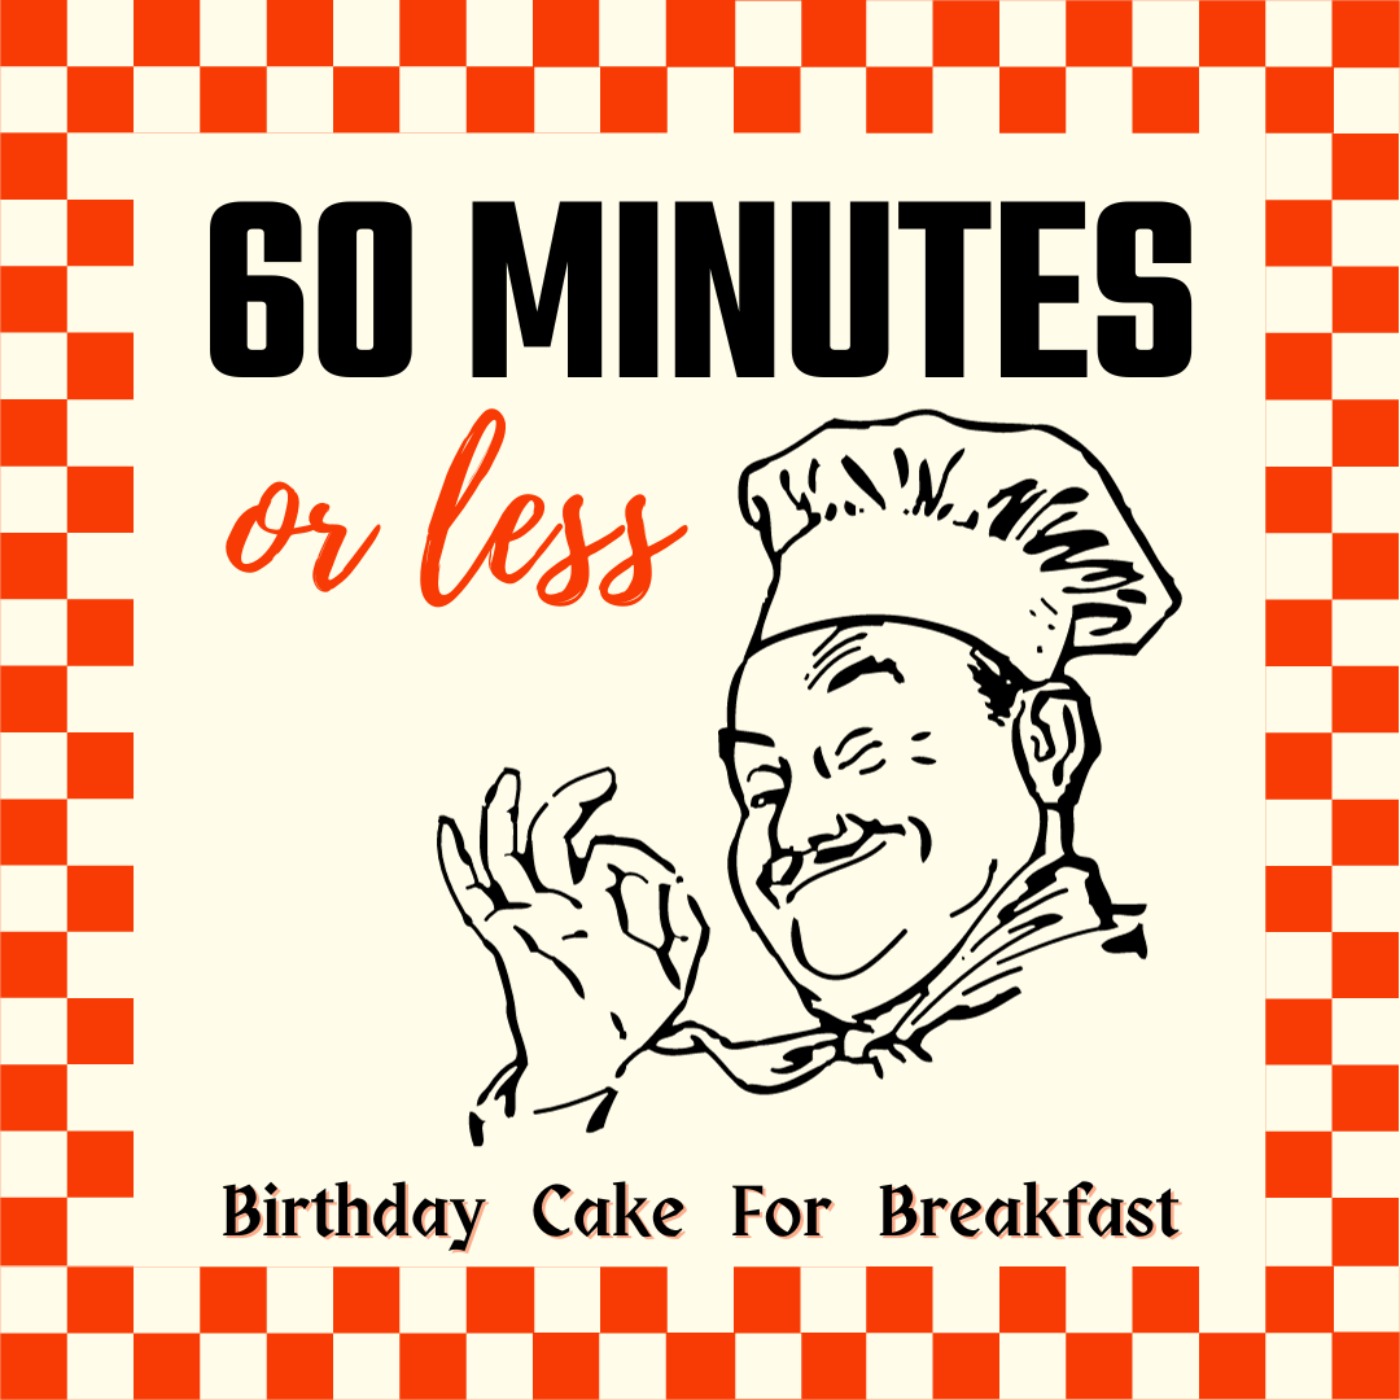 Introducing 60 Minutes or less - A podcast from Birthday Cake For Breakfast